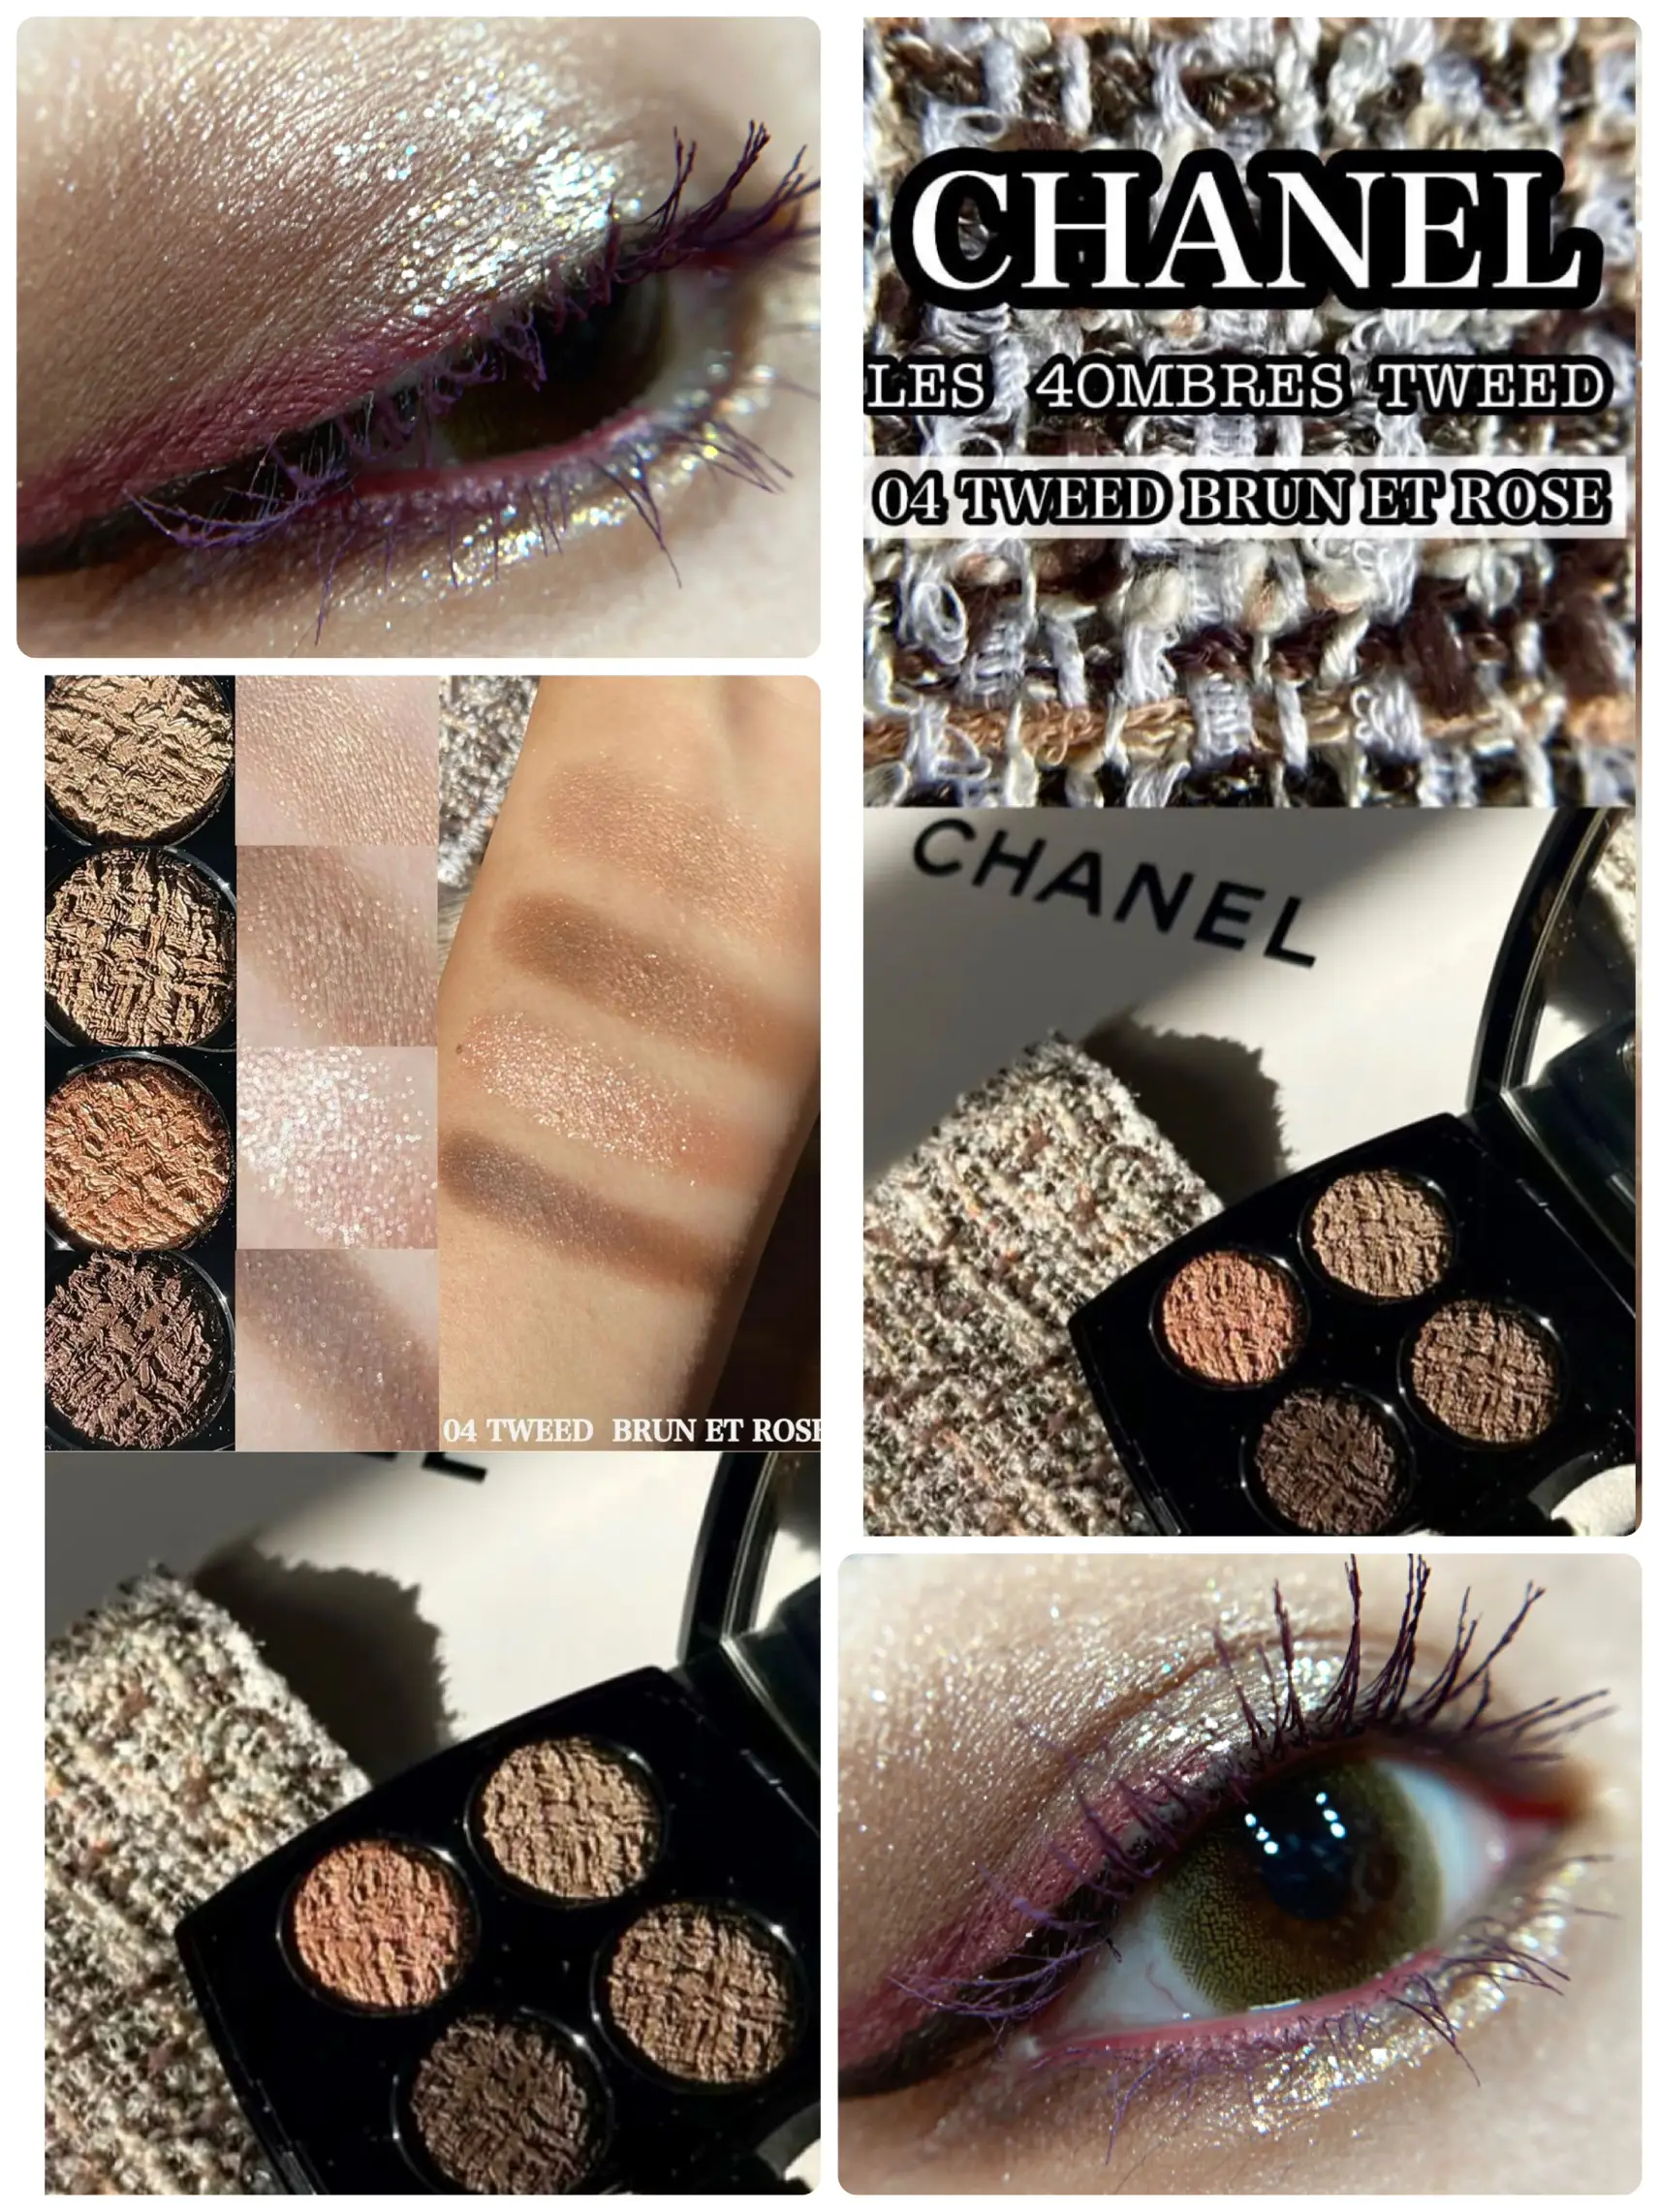 CHANEL Tweeded Blanc Erose Makeup, Gallery posted by chamaru222